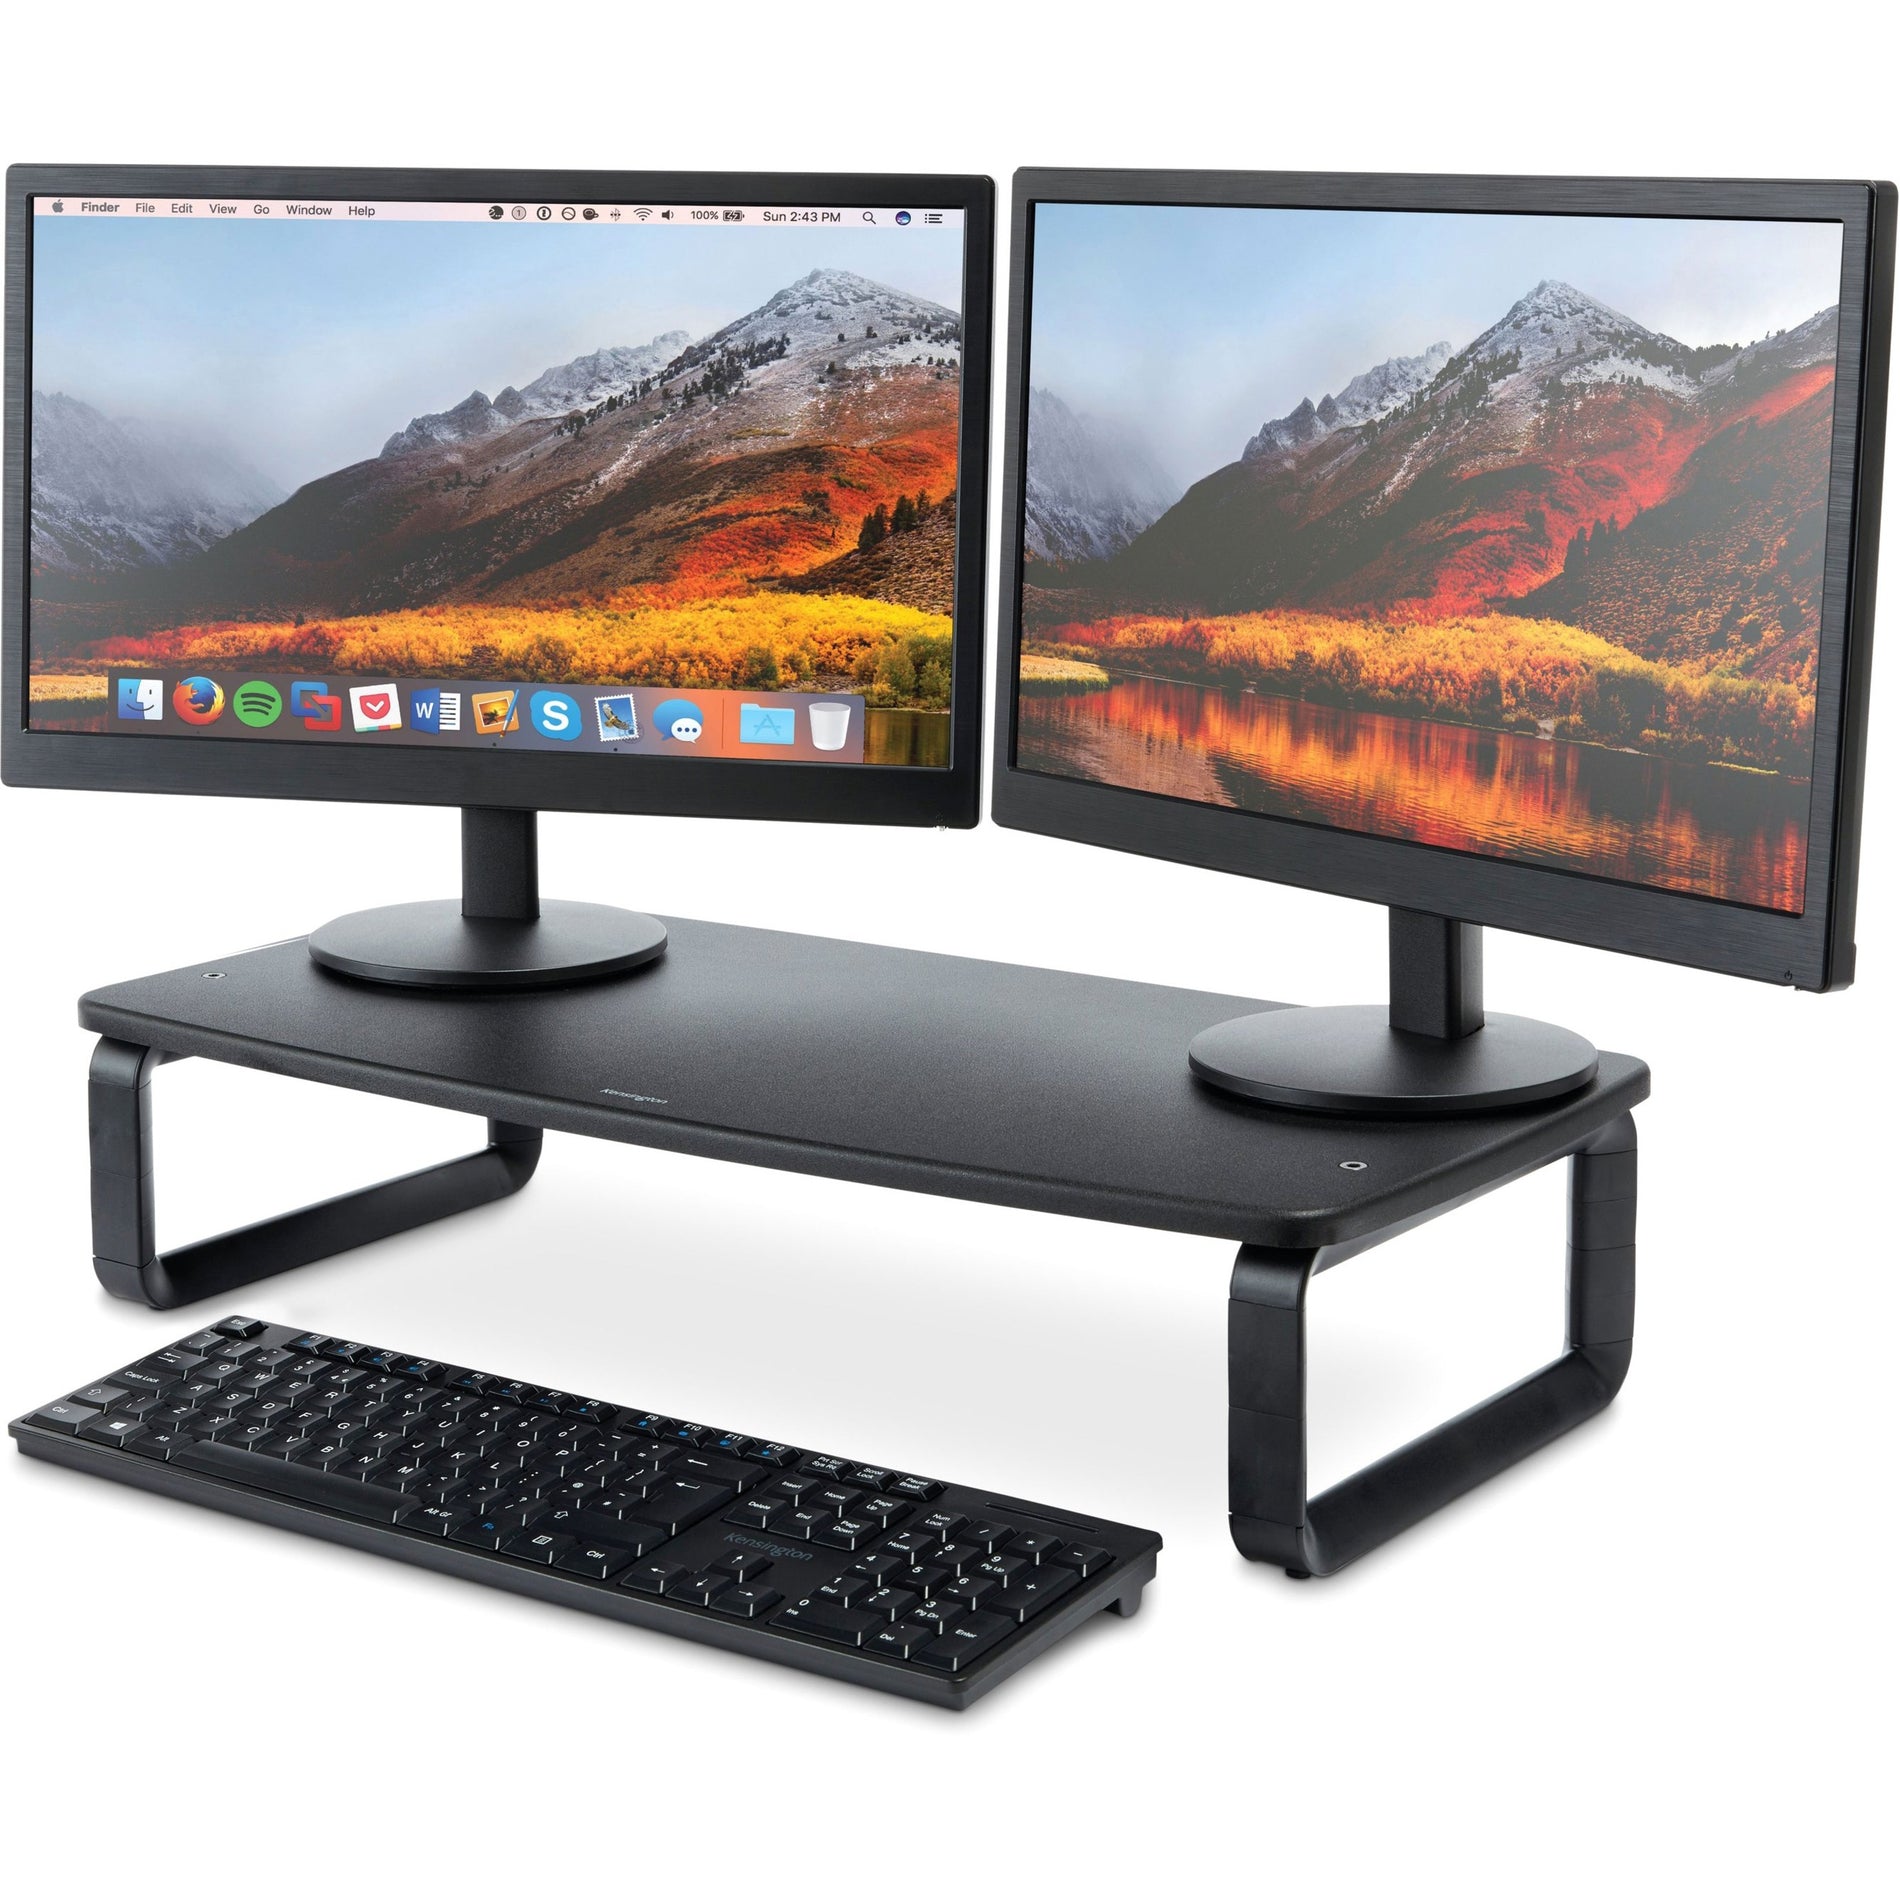 Kensington K52797WW SmartFit Extra Wide Monitor Stand for up to 27" screens, Black